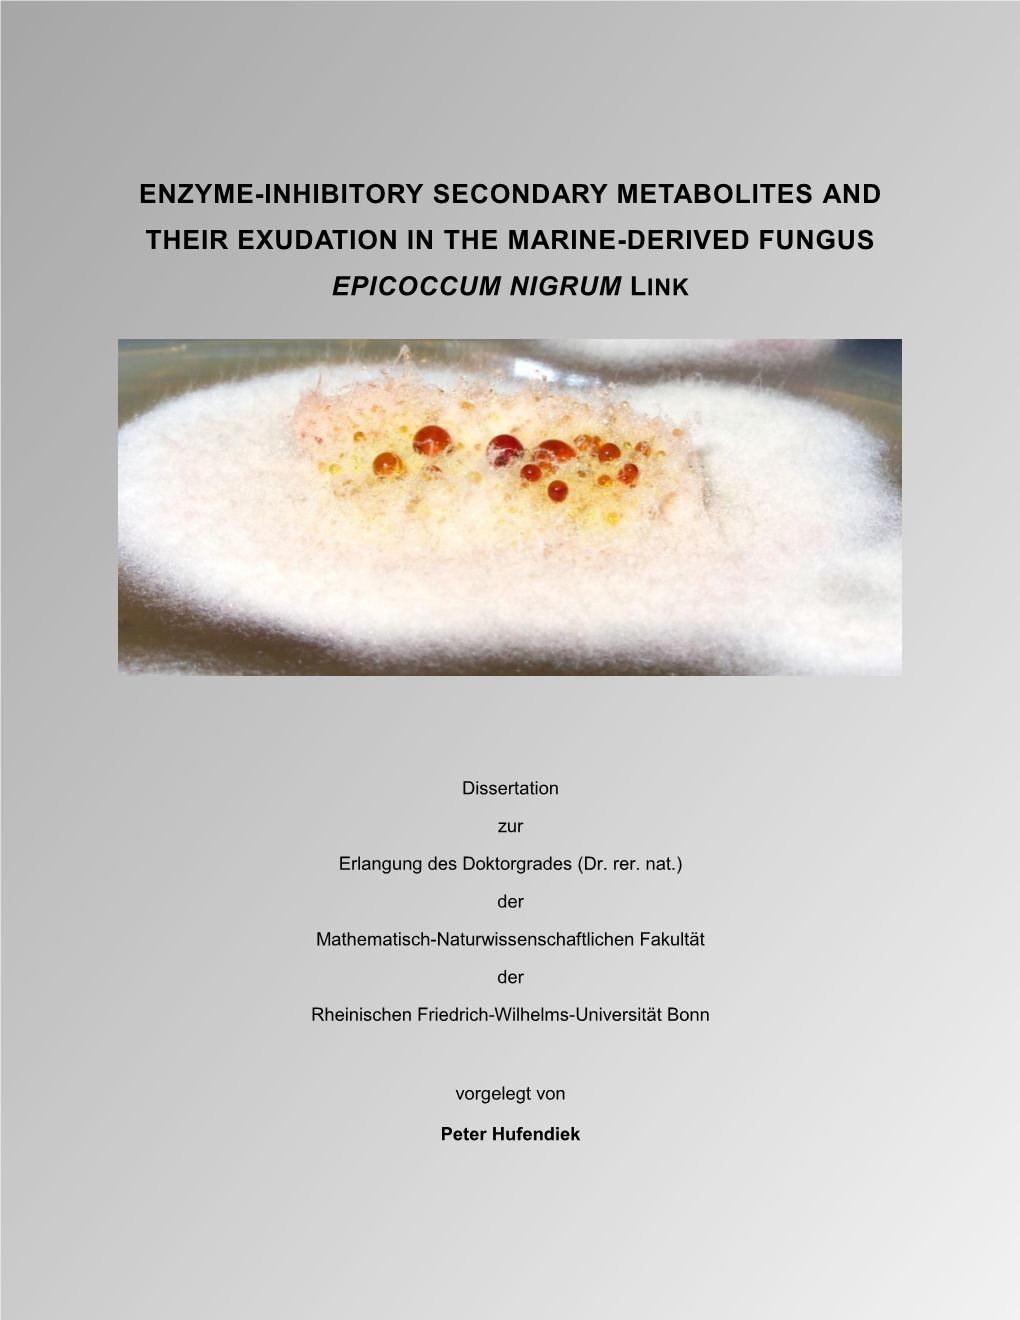 Enzyme-Inhibitory Secondary Metabolites and Their Exudation in the Marine-Derived Fungus Epicoccum Nigrum Link